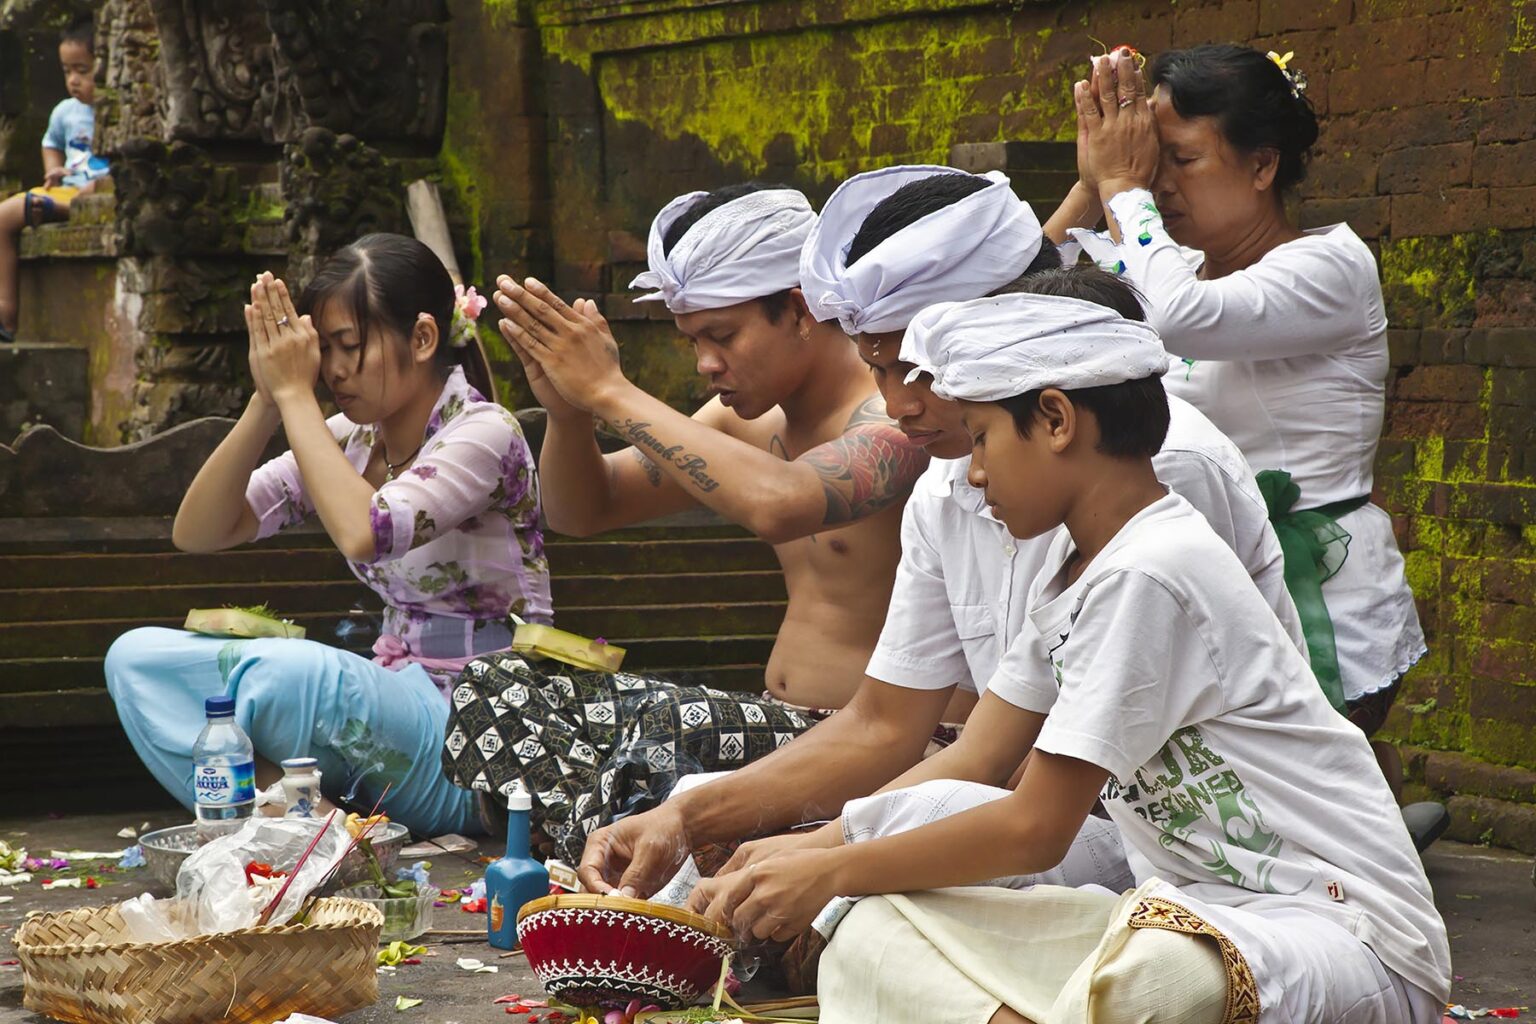 A BALINESE family prays at PURA TIRTA EMPUL a Hindu Temple complex and cold springs with healing waters - TAMPAKSIRING, BALI, INDONESIA